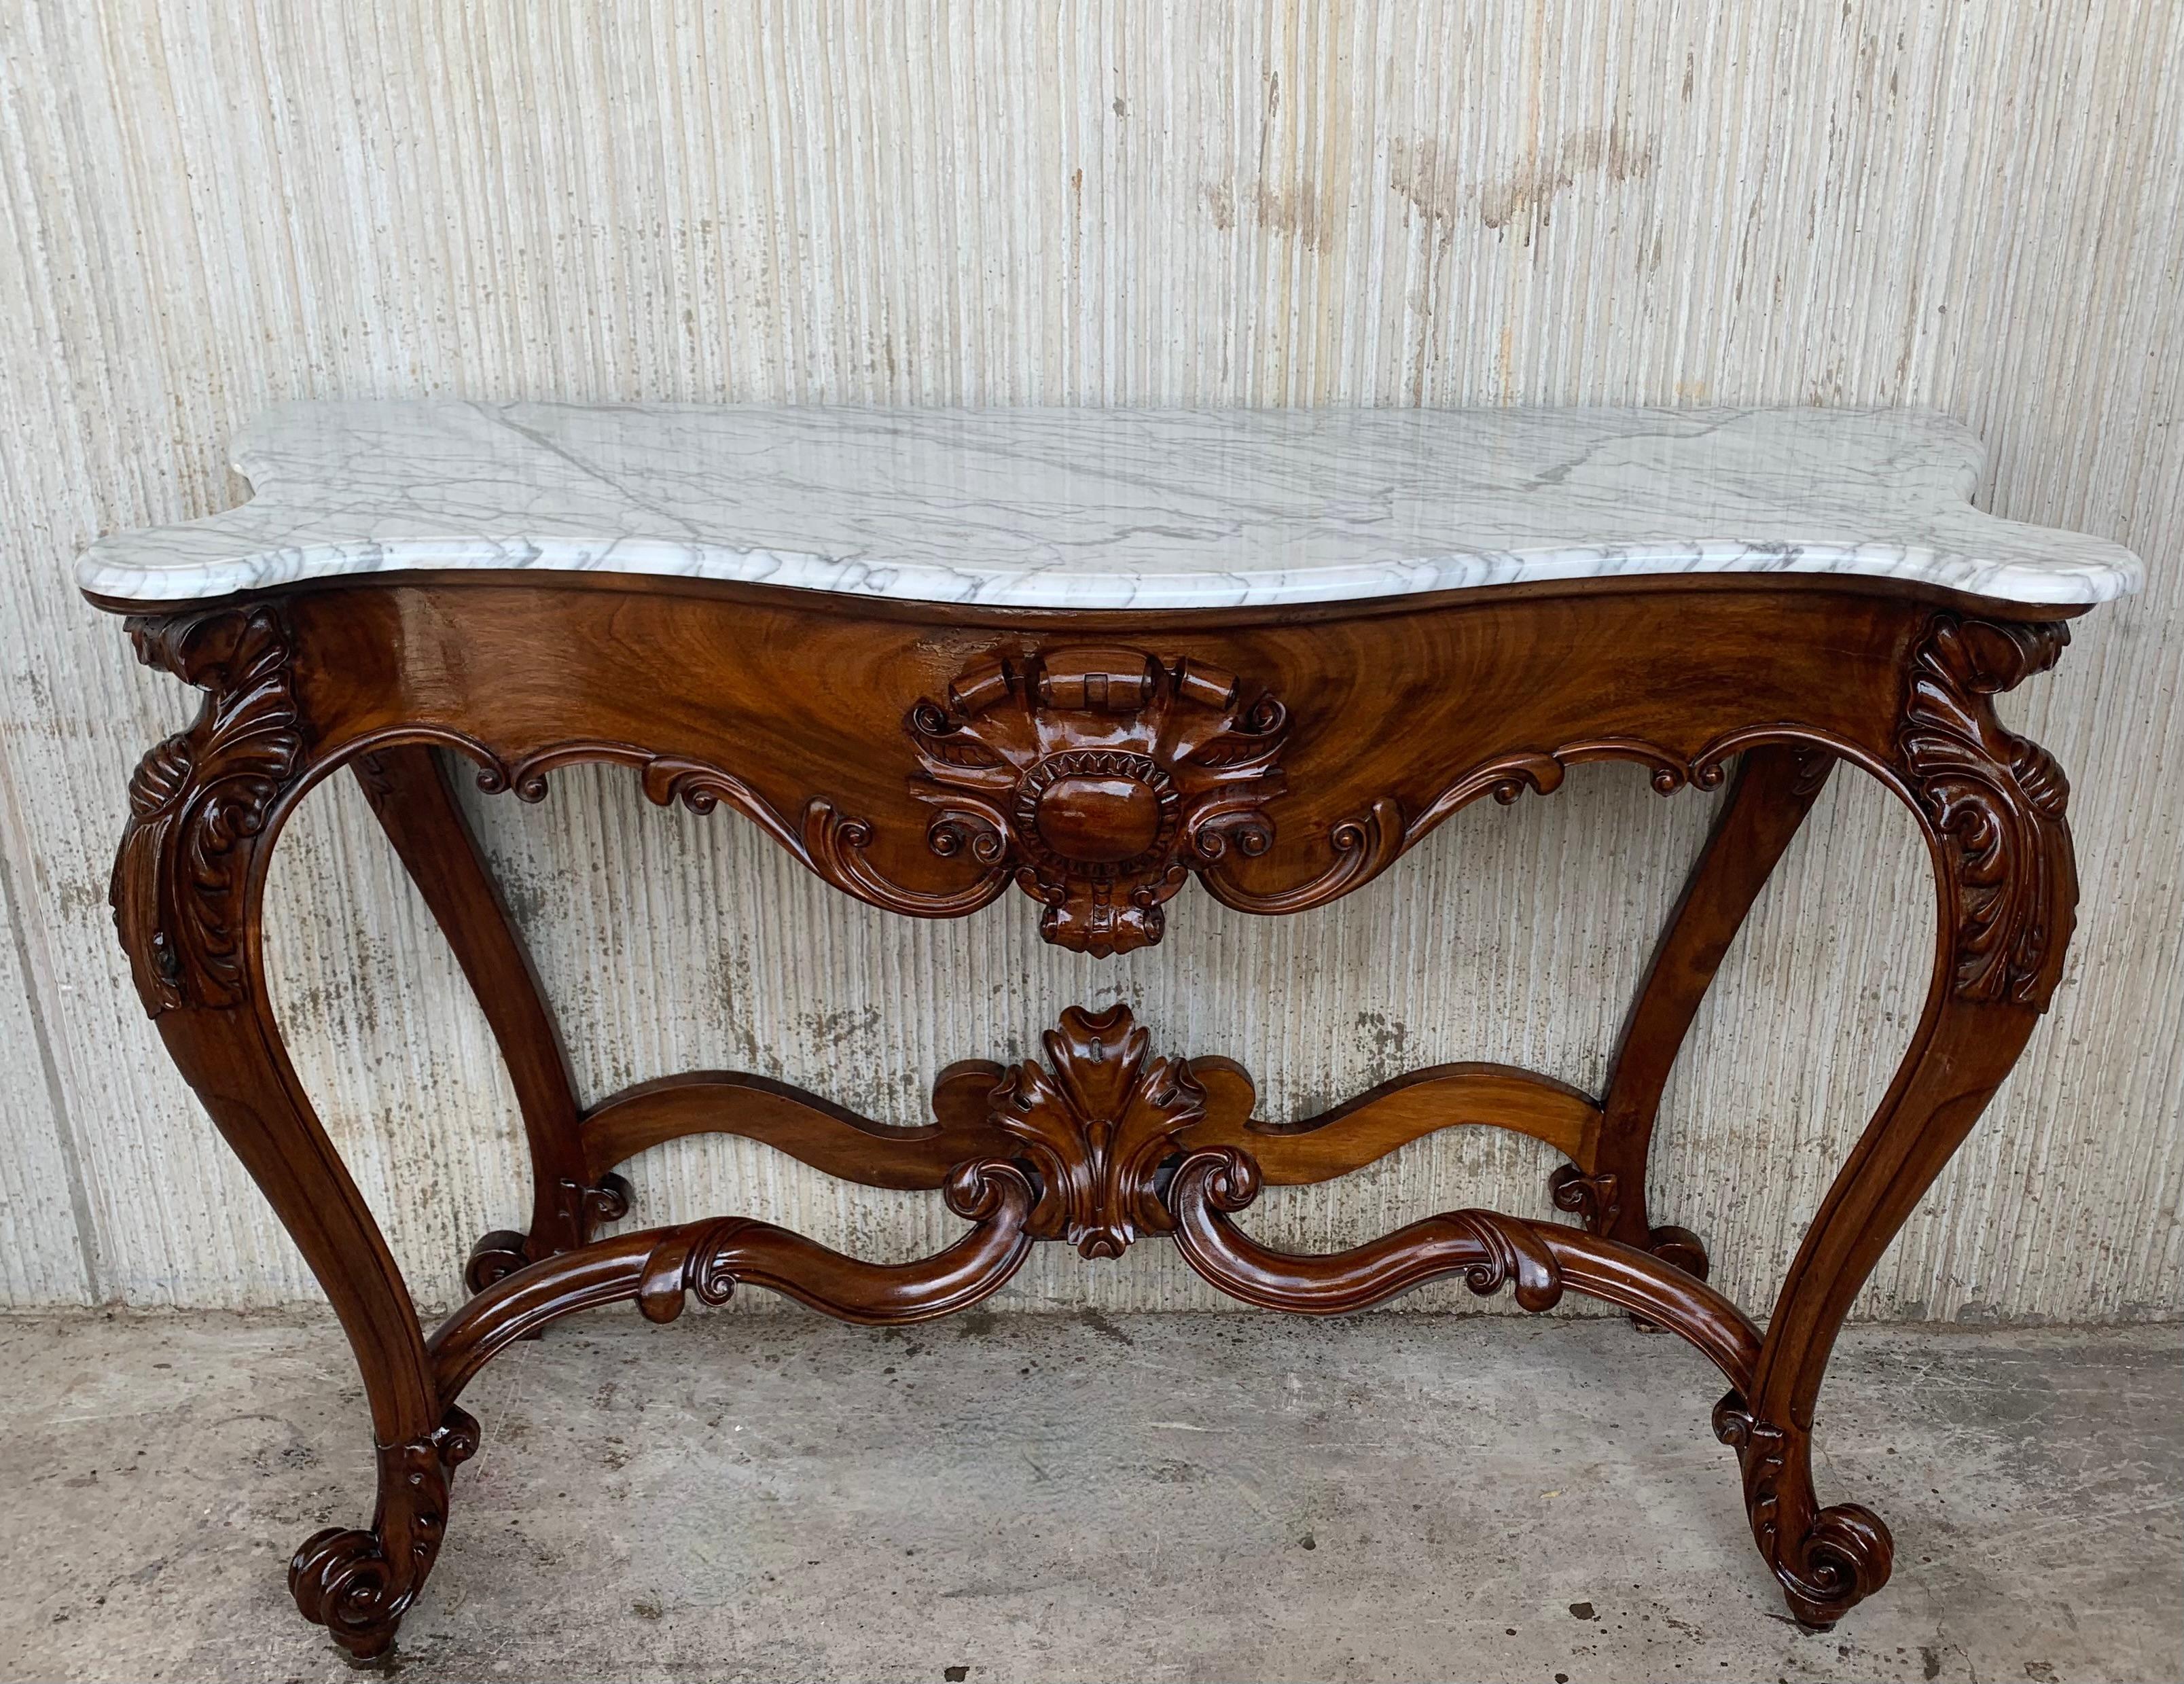 20th Century Large French Regency Carved Walnut Console Table with White Marble Top '2 Avai' For Sale